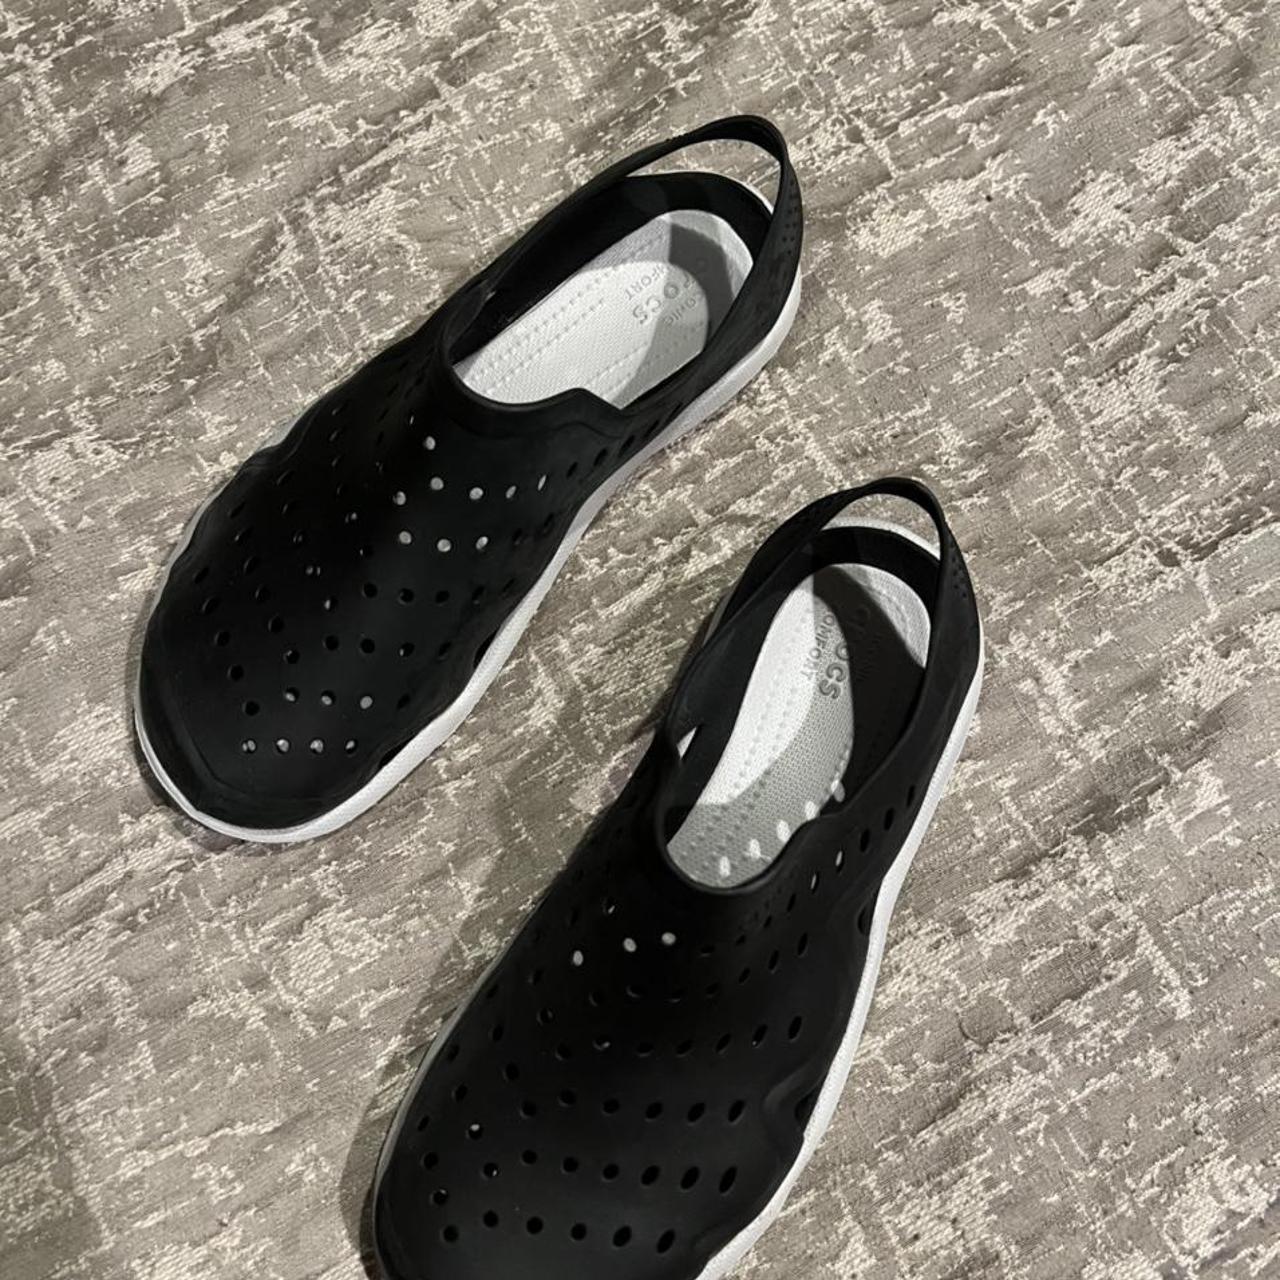 Product Image 3 - Mens size 6 crocs

Worn once

Perfect